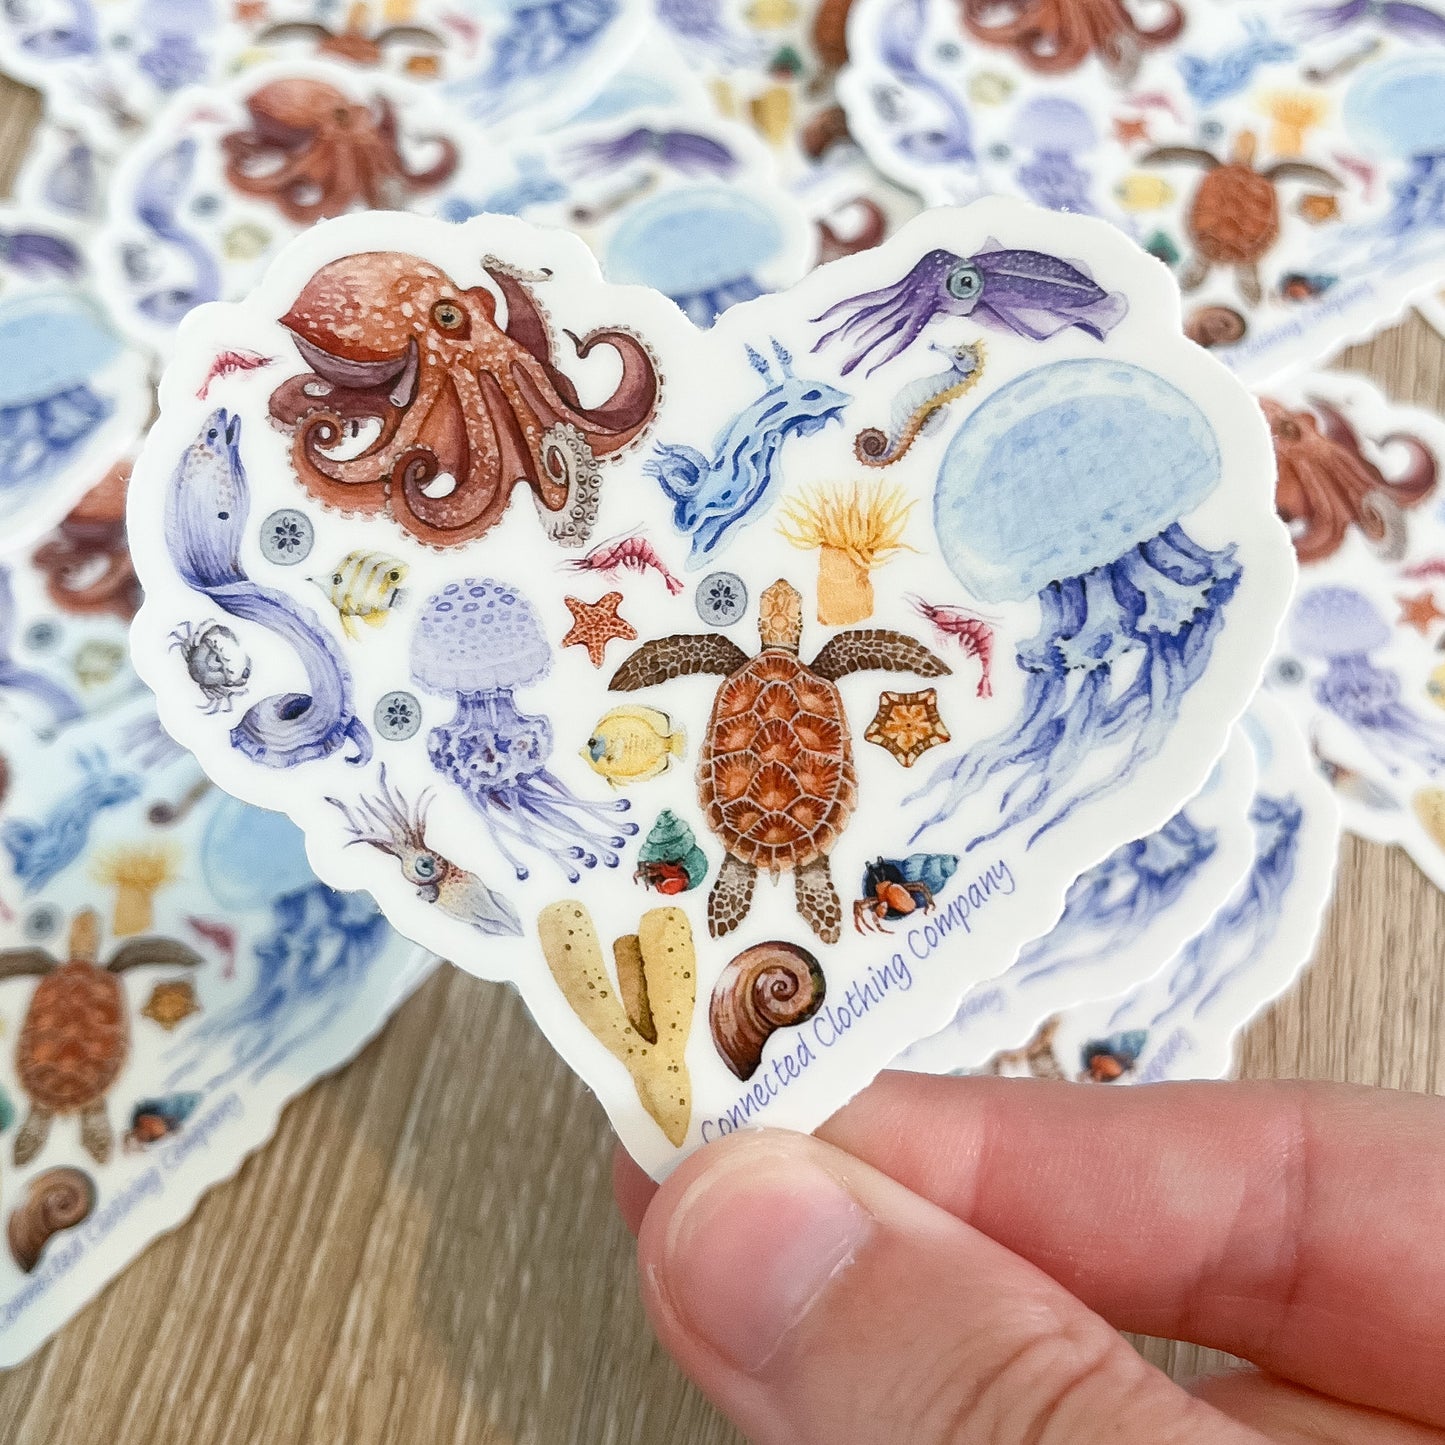 Ocean Sea Creatures Sticker - Connected Clothing Company - 10% of proceeds donated to ocean conservation